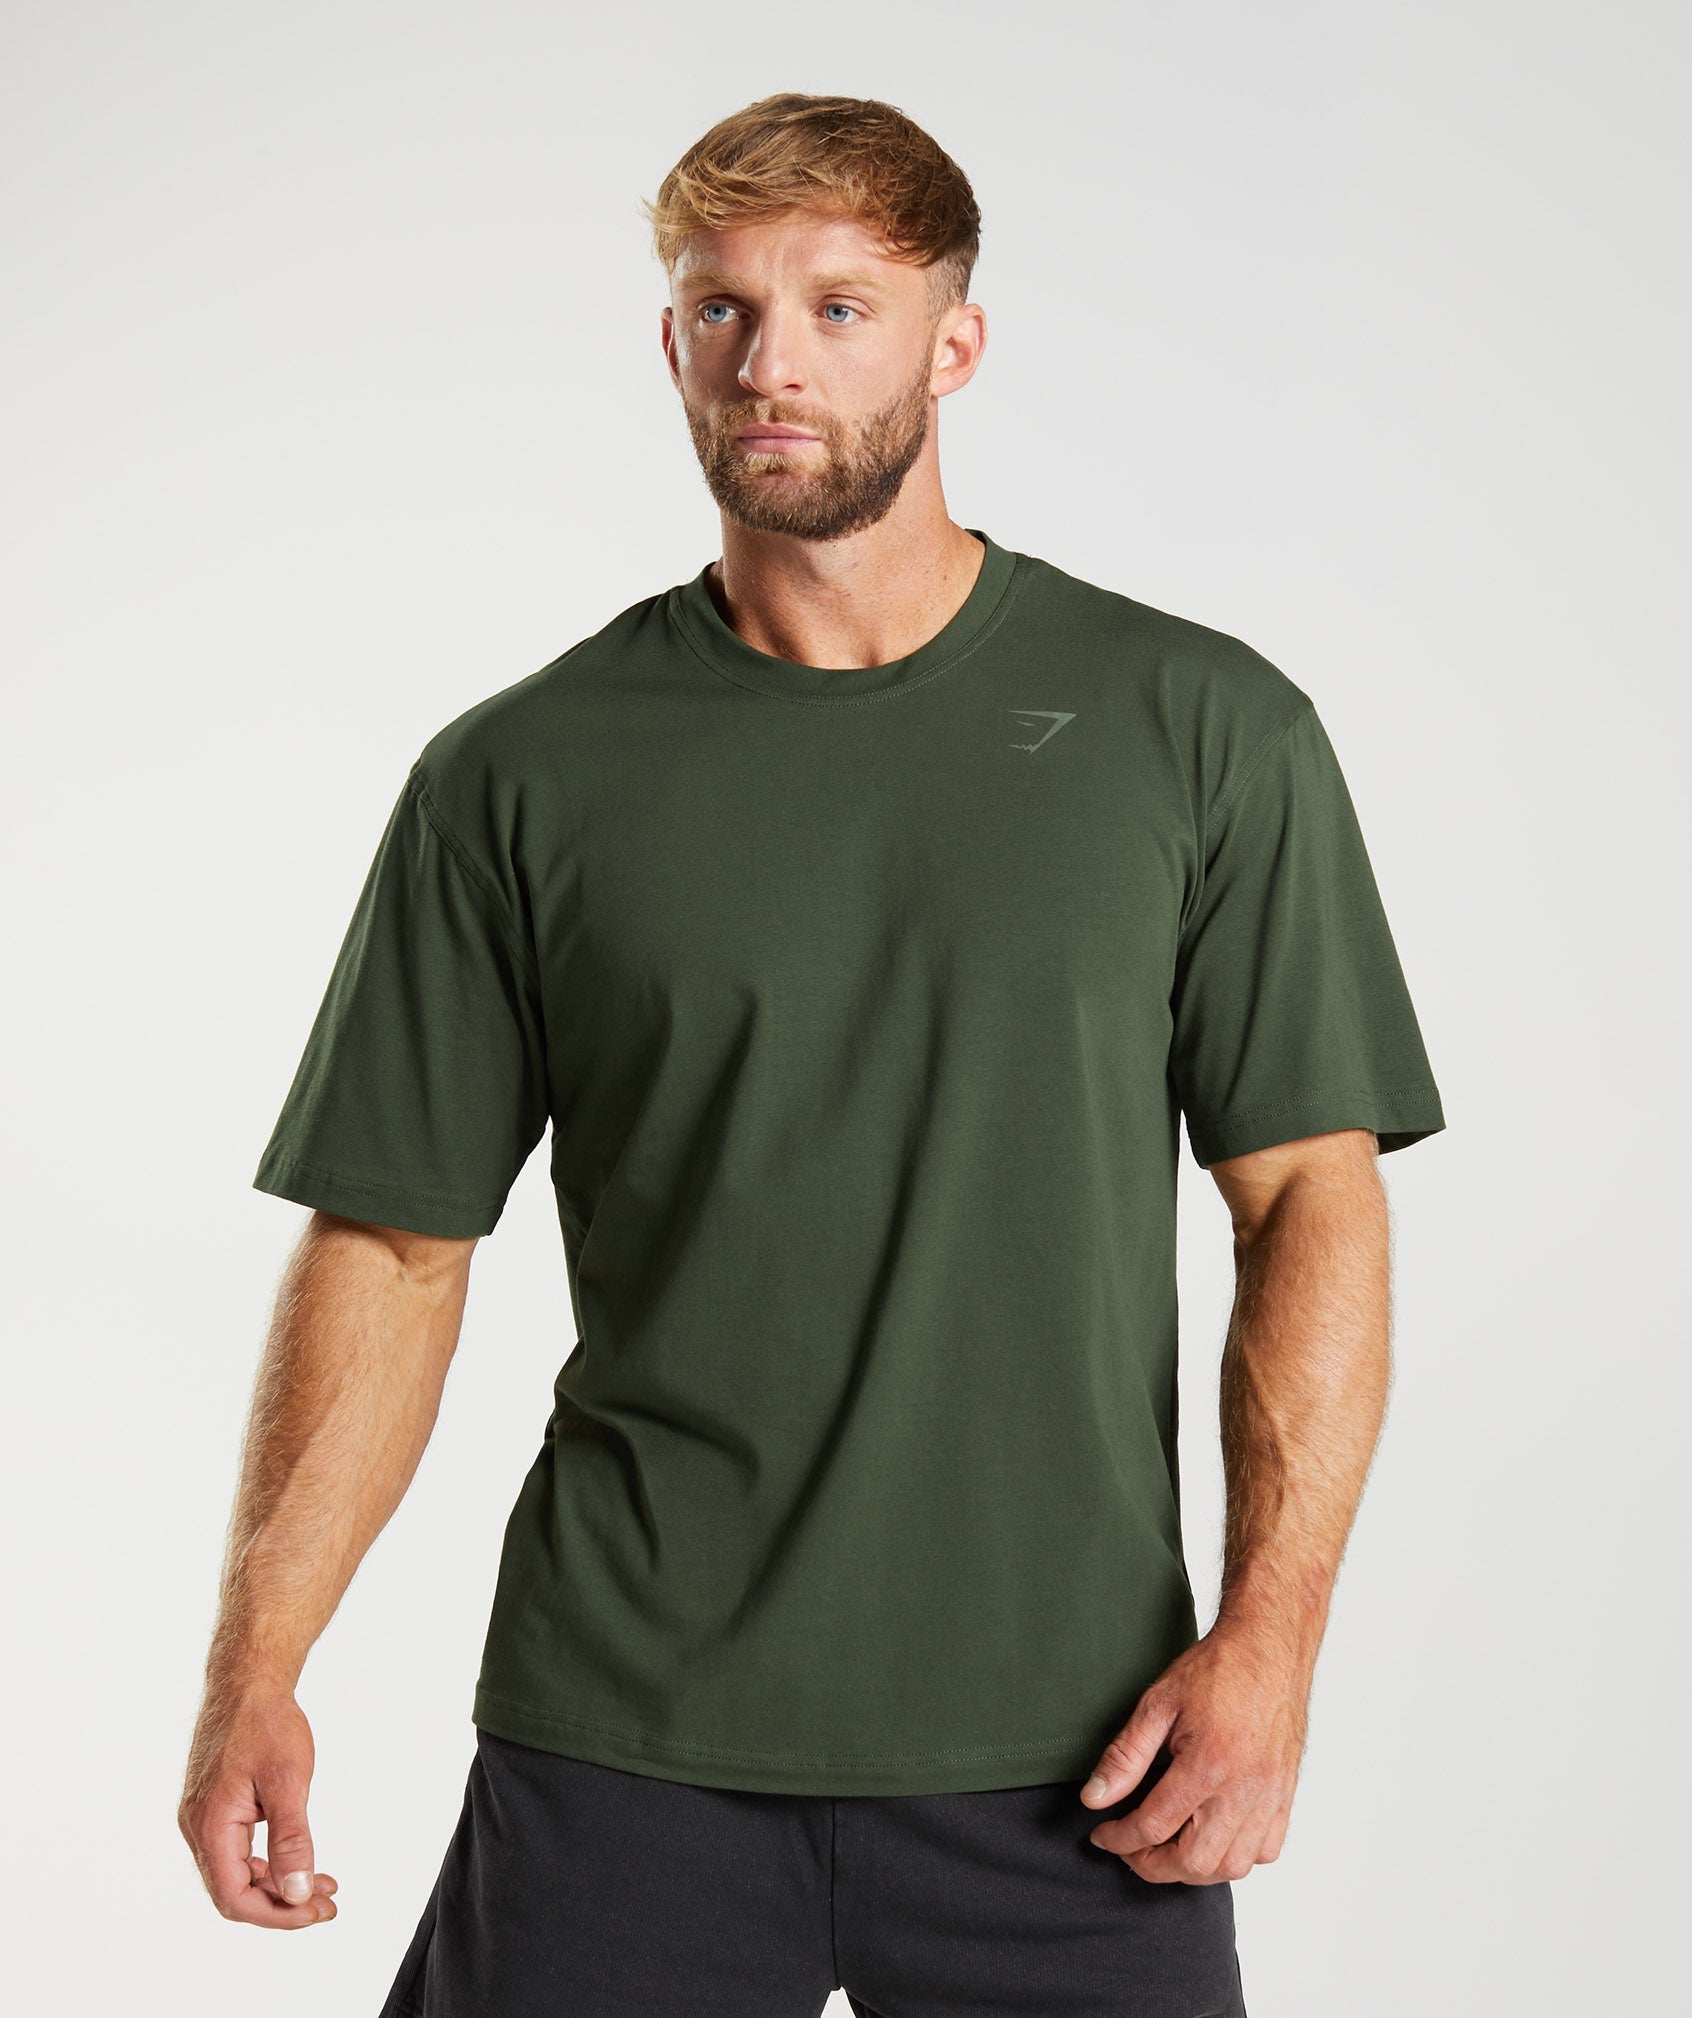 Power T-Shirt in Moss Olive - view 2